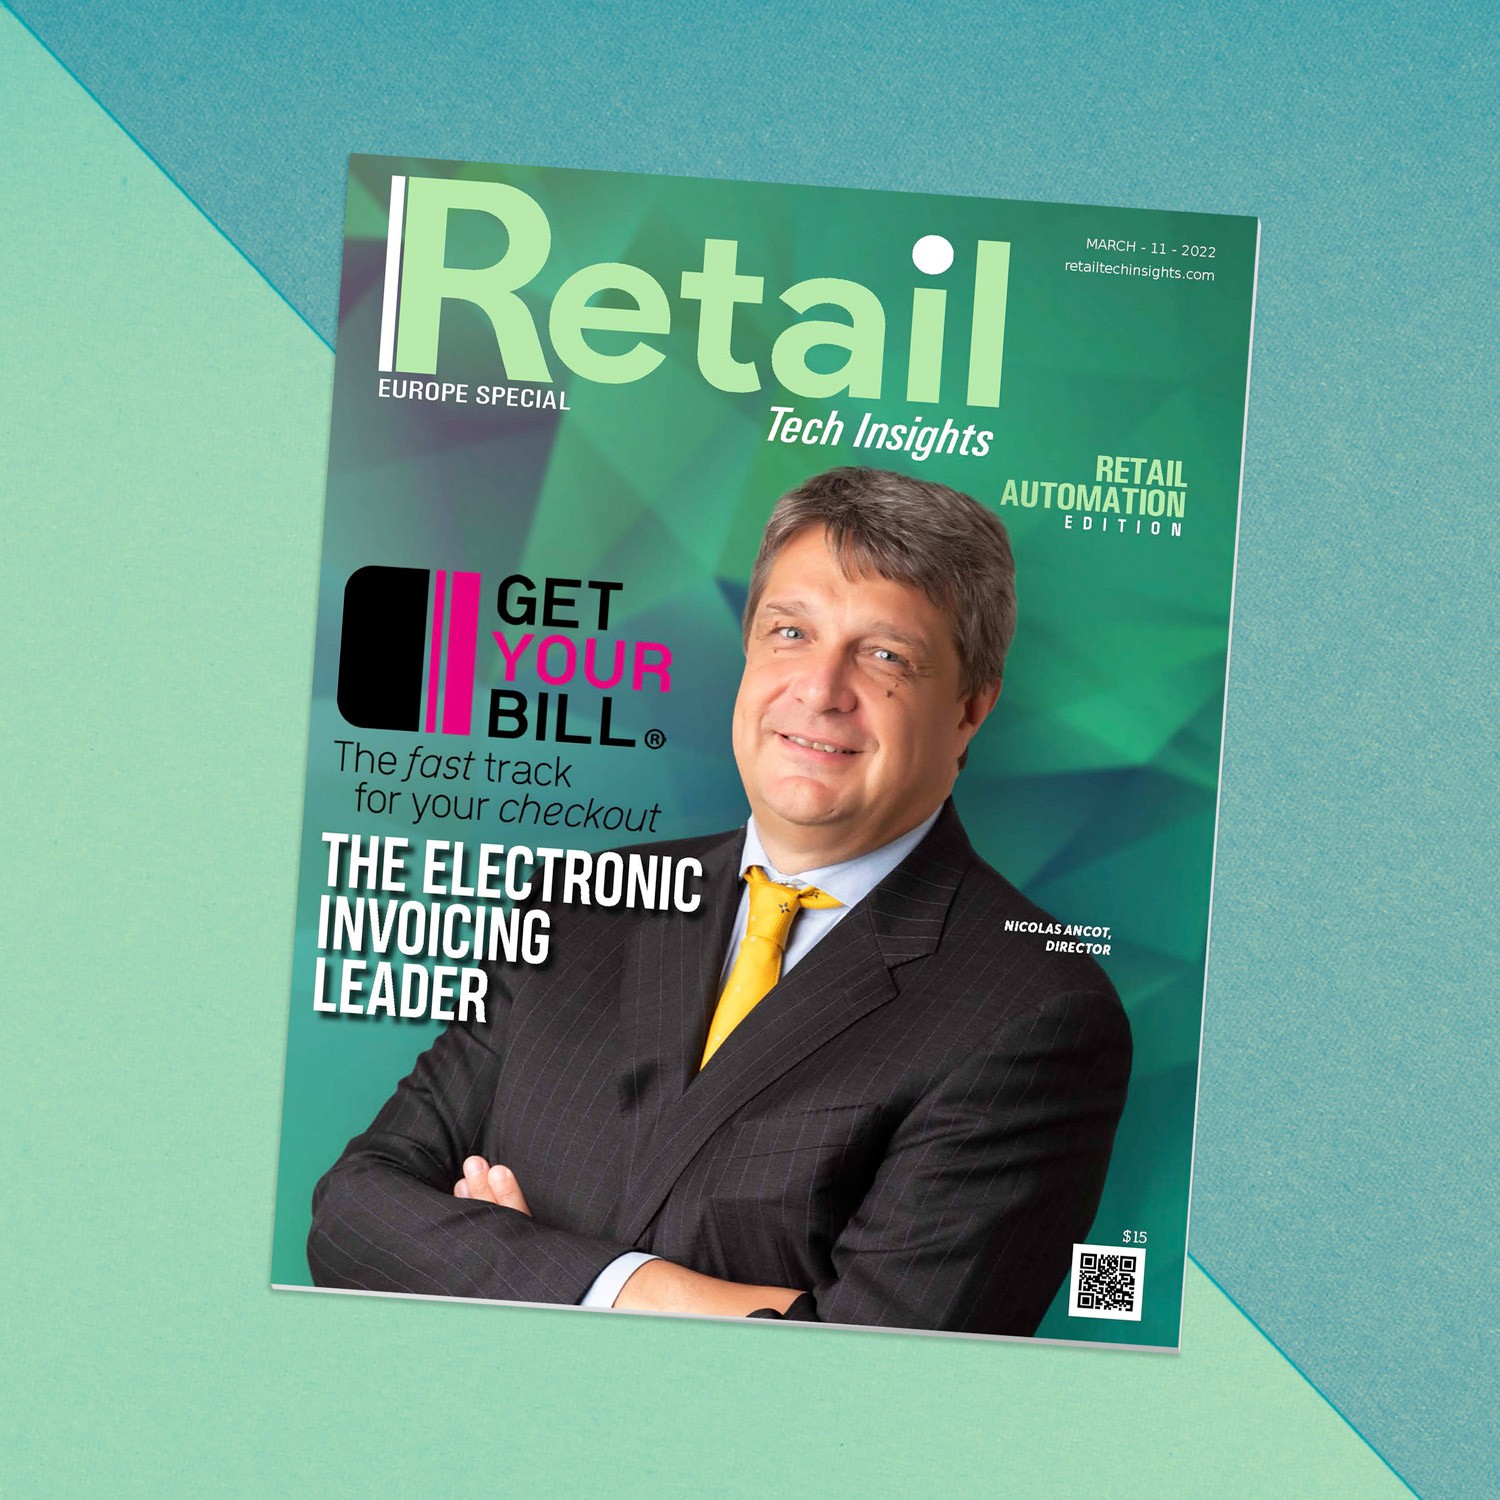 Nicolas Ancot, director - on the cover of the Retail Tech Insight - March 2022